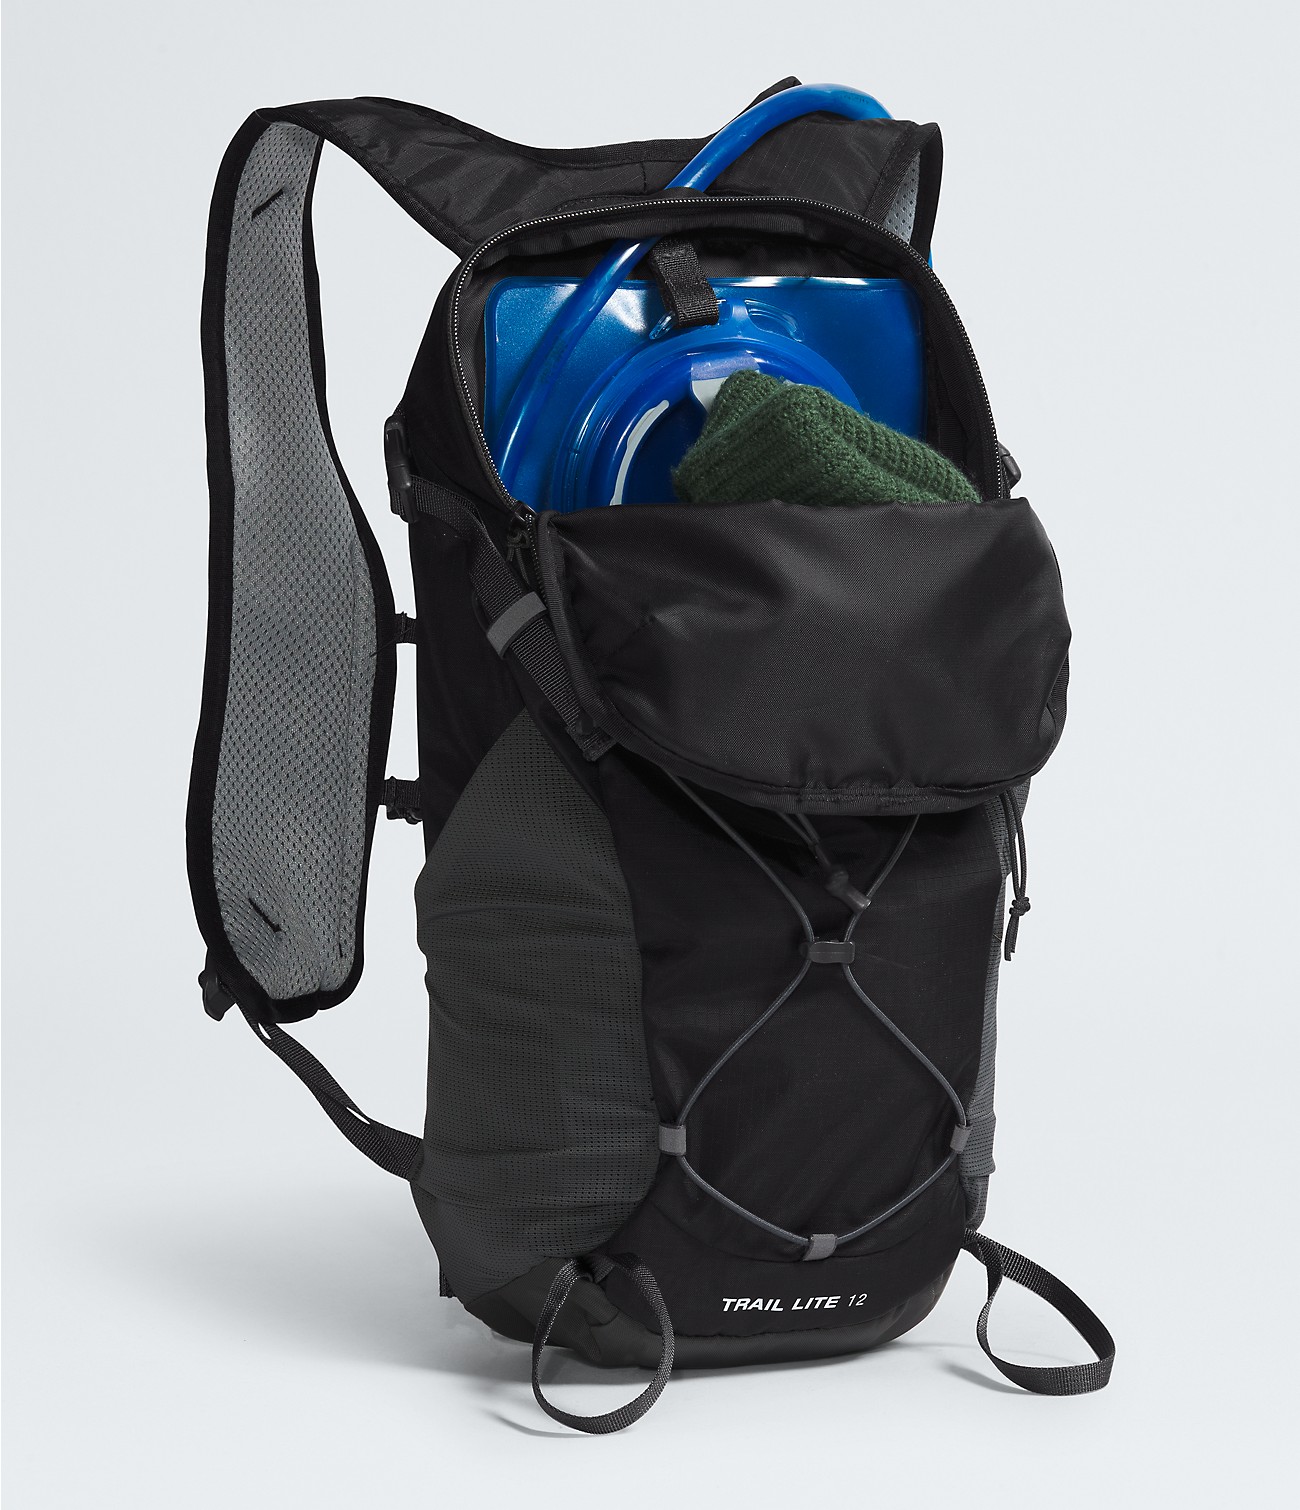 Trail Lite 12 Backpack | The North Face